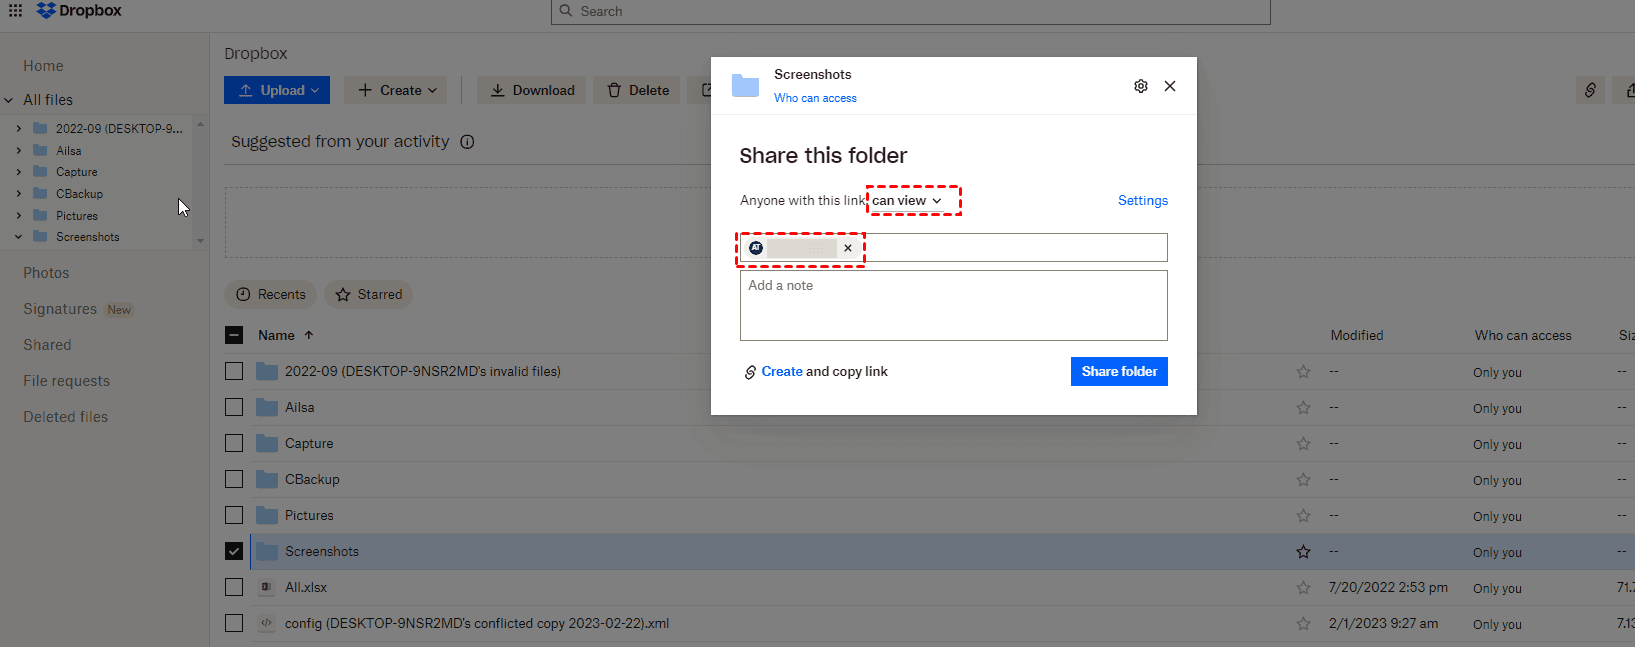 Share Dropbox with View Access